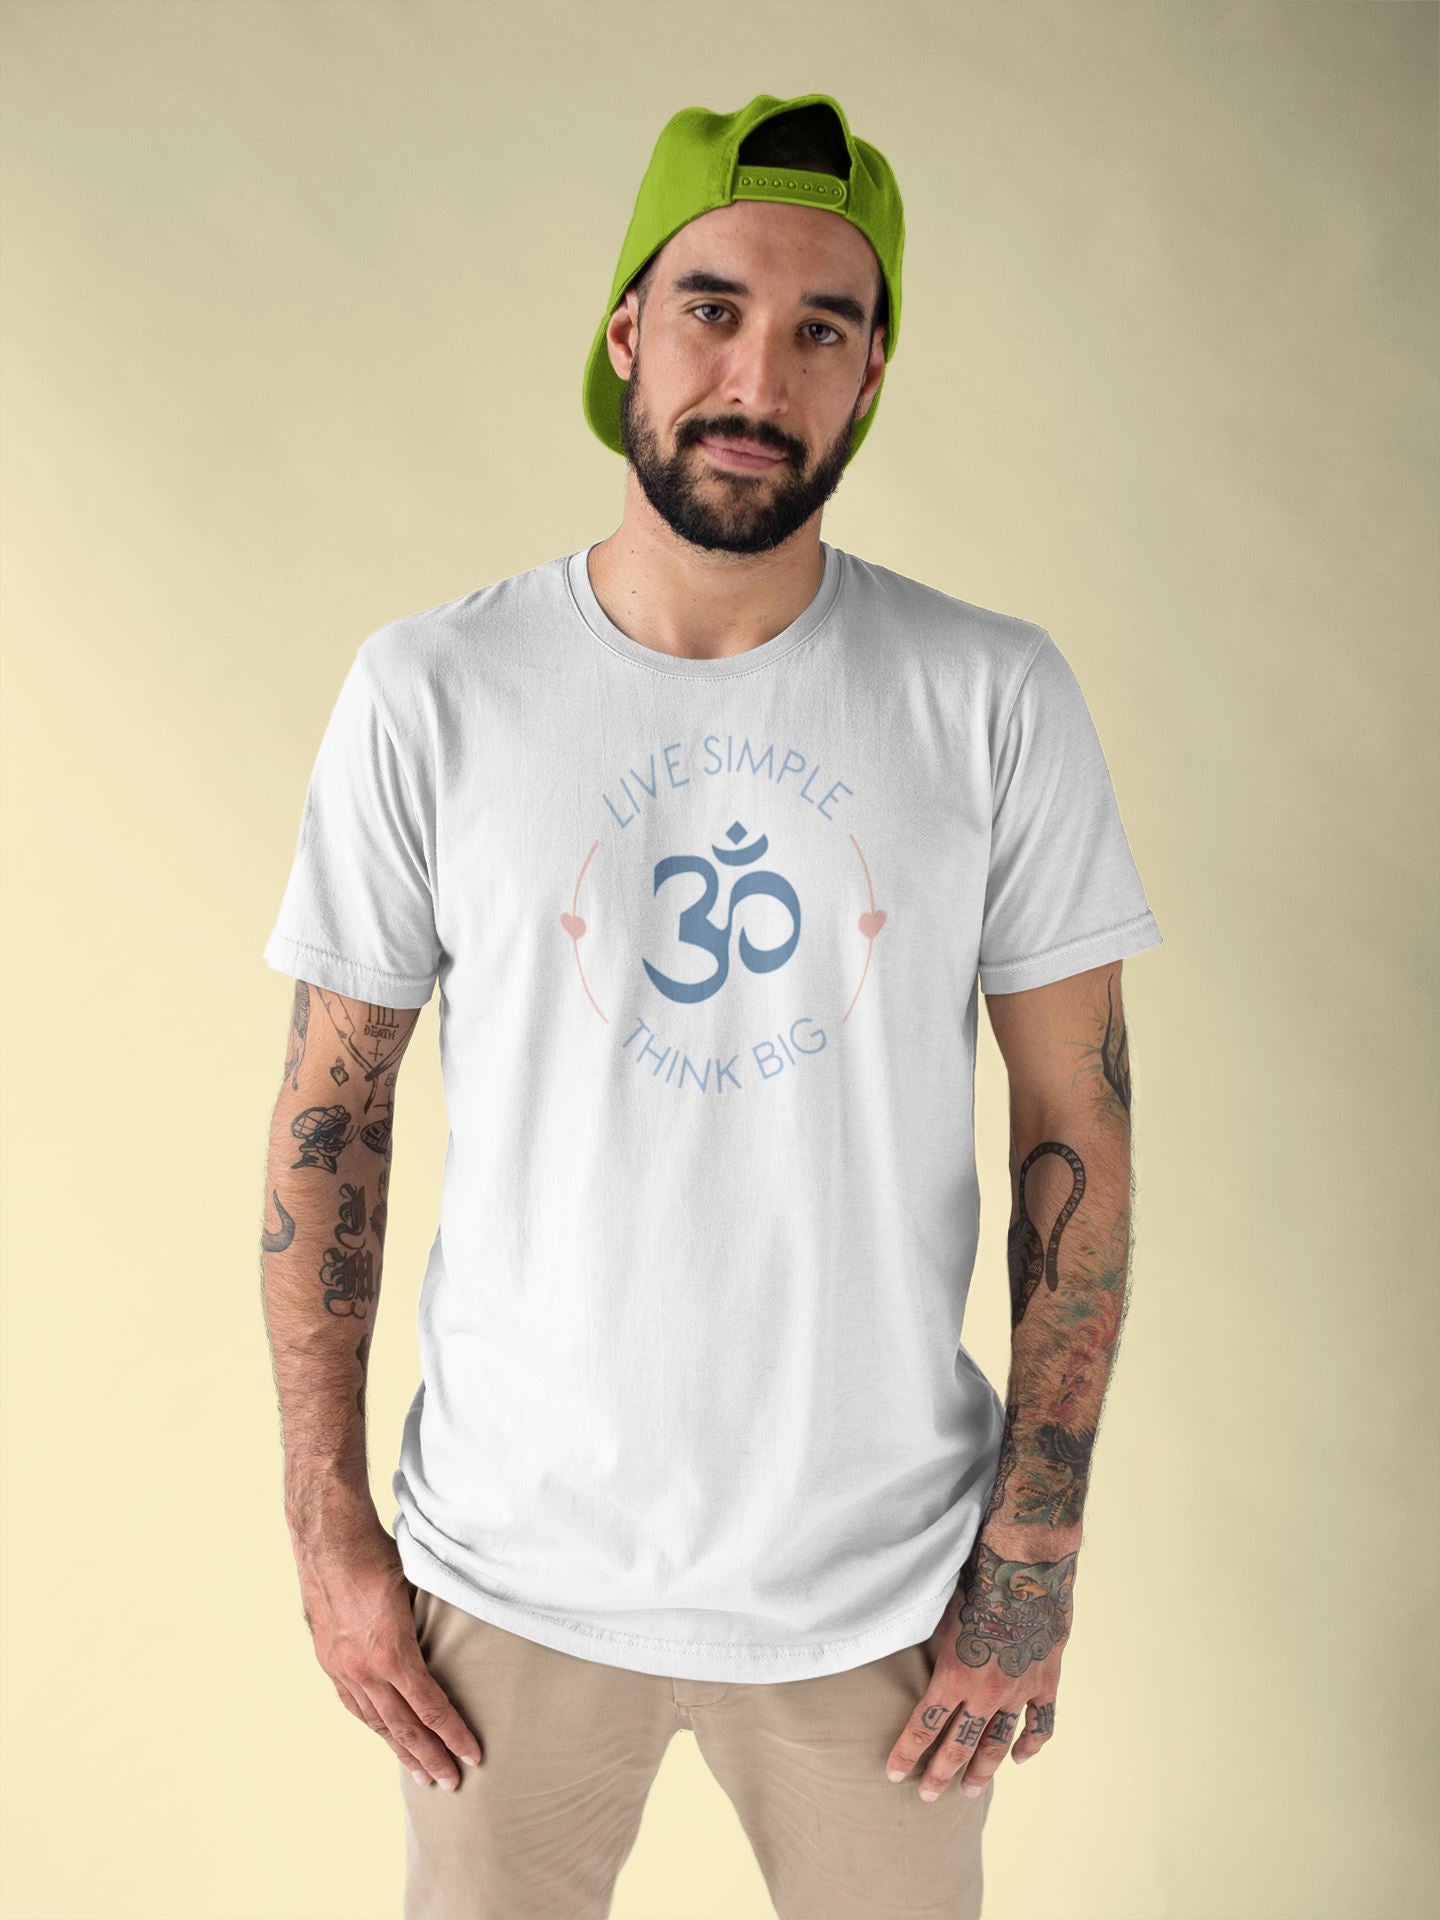 Aum Live Simple and Think Big Special White T Shirt for Men and Women freeshipping - Catch My Drift India